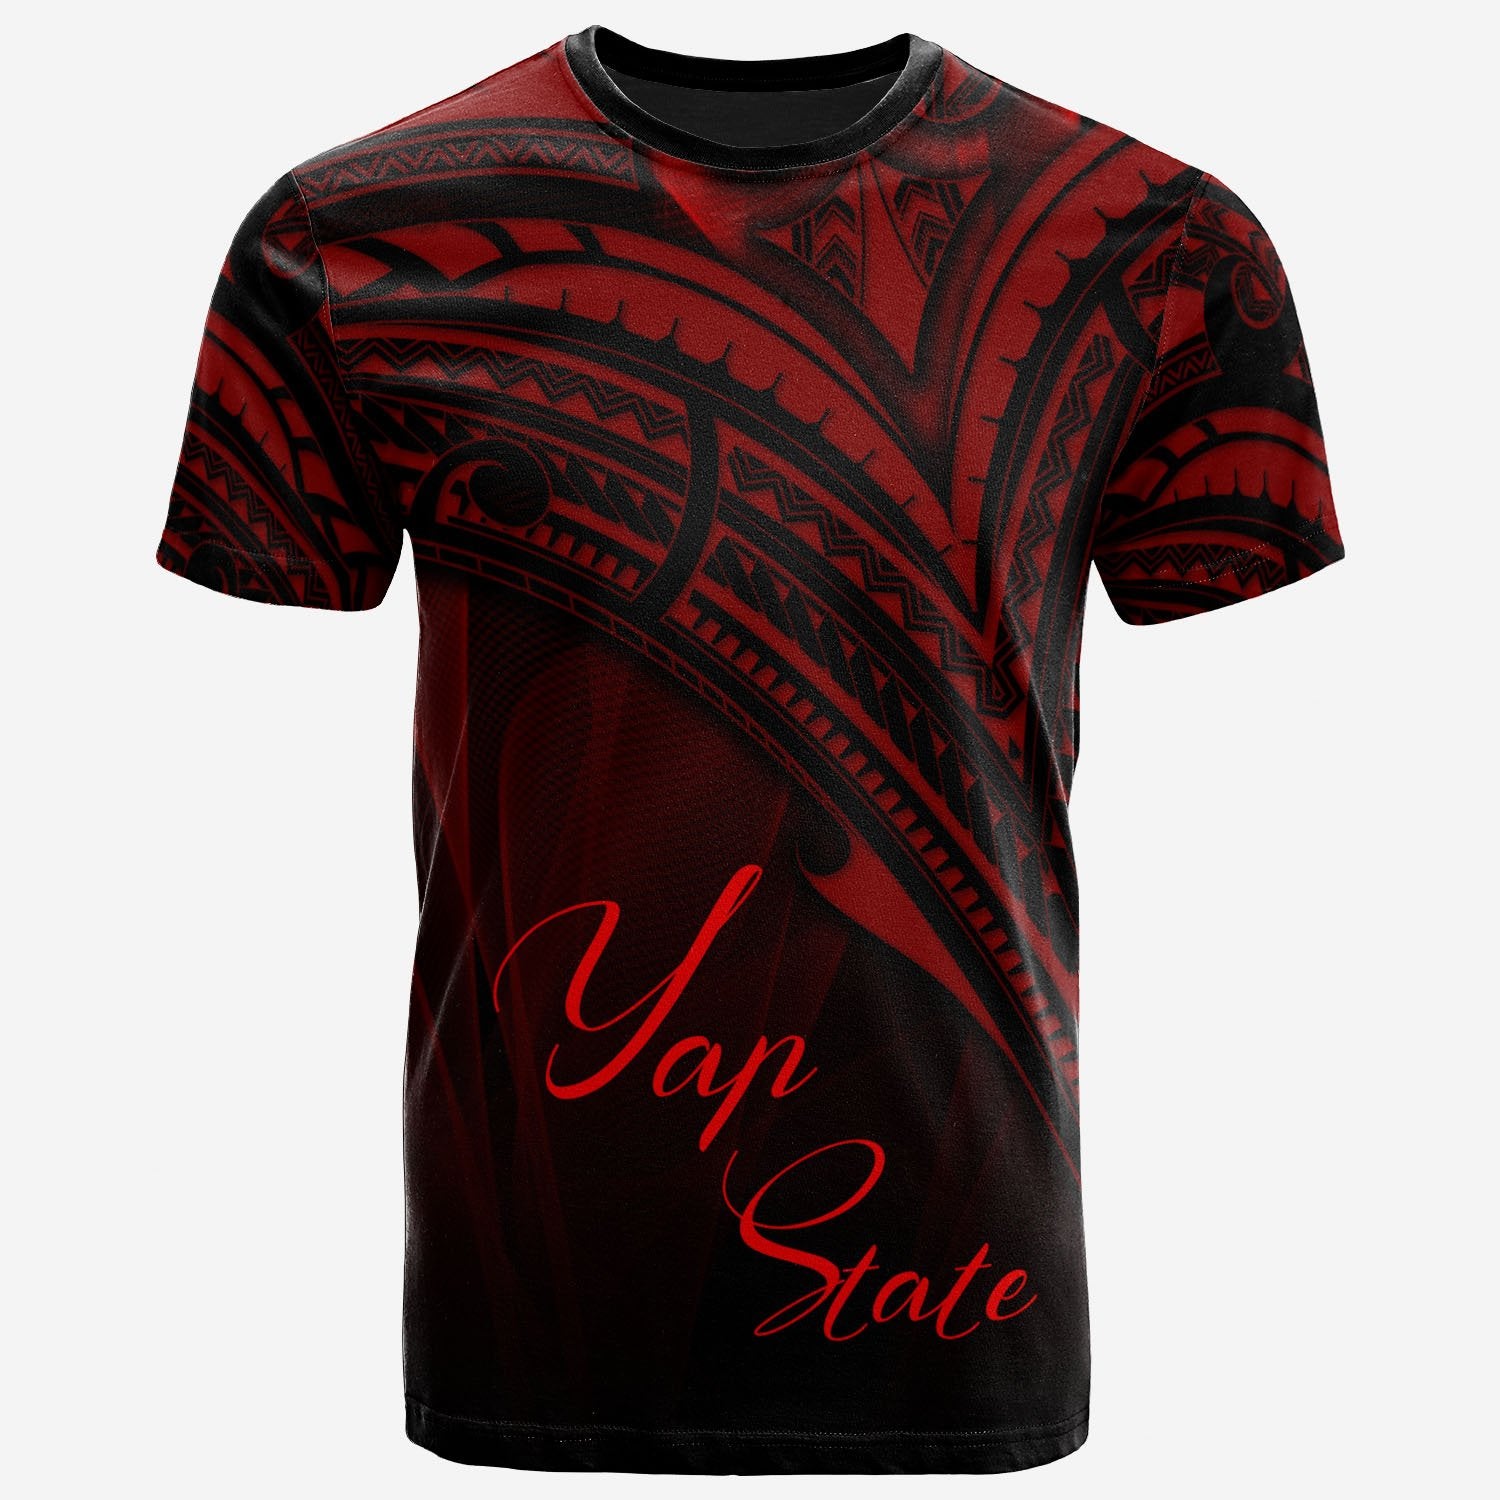 Yap State T Shirt Red Color Cross Style Unisex Black - Polynesian Pride